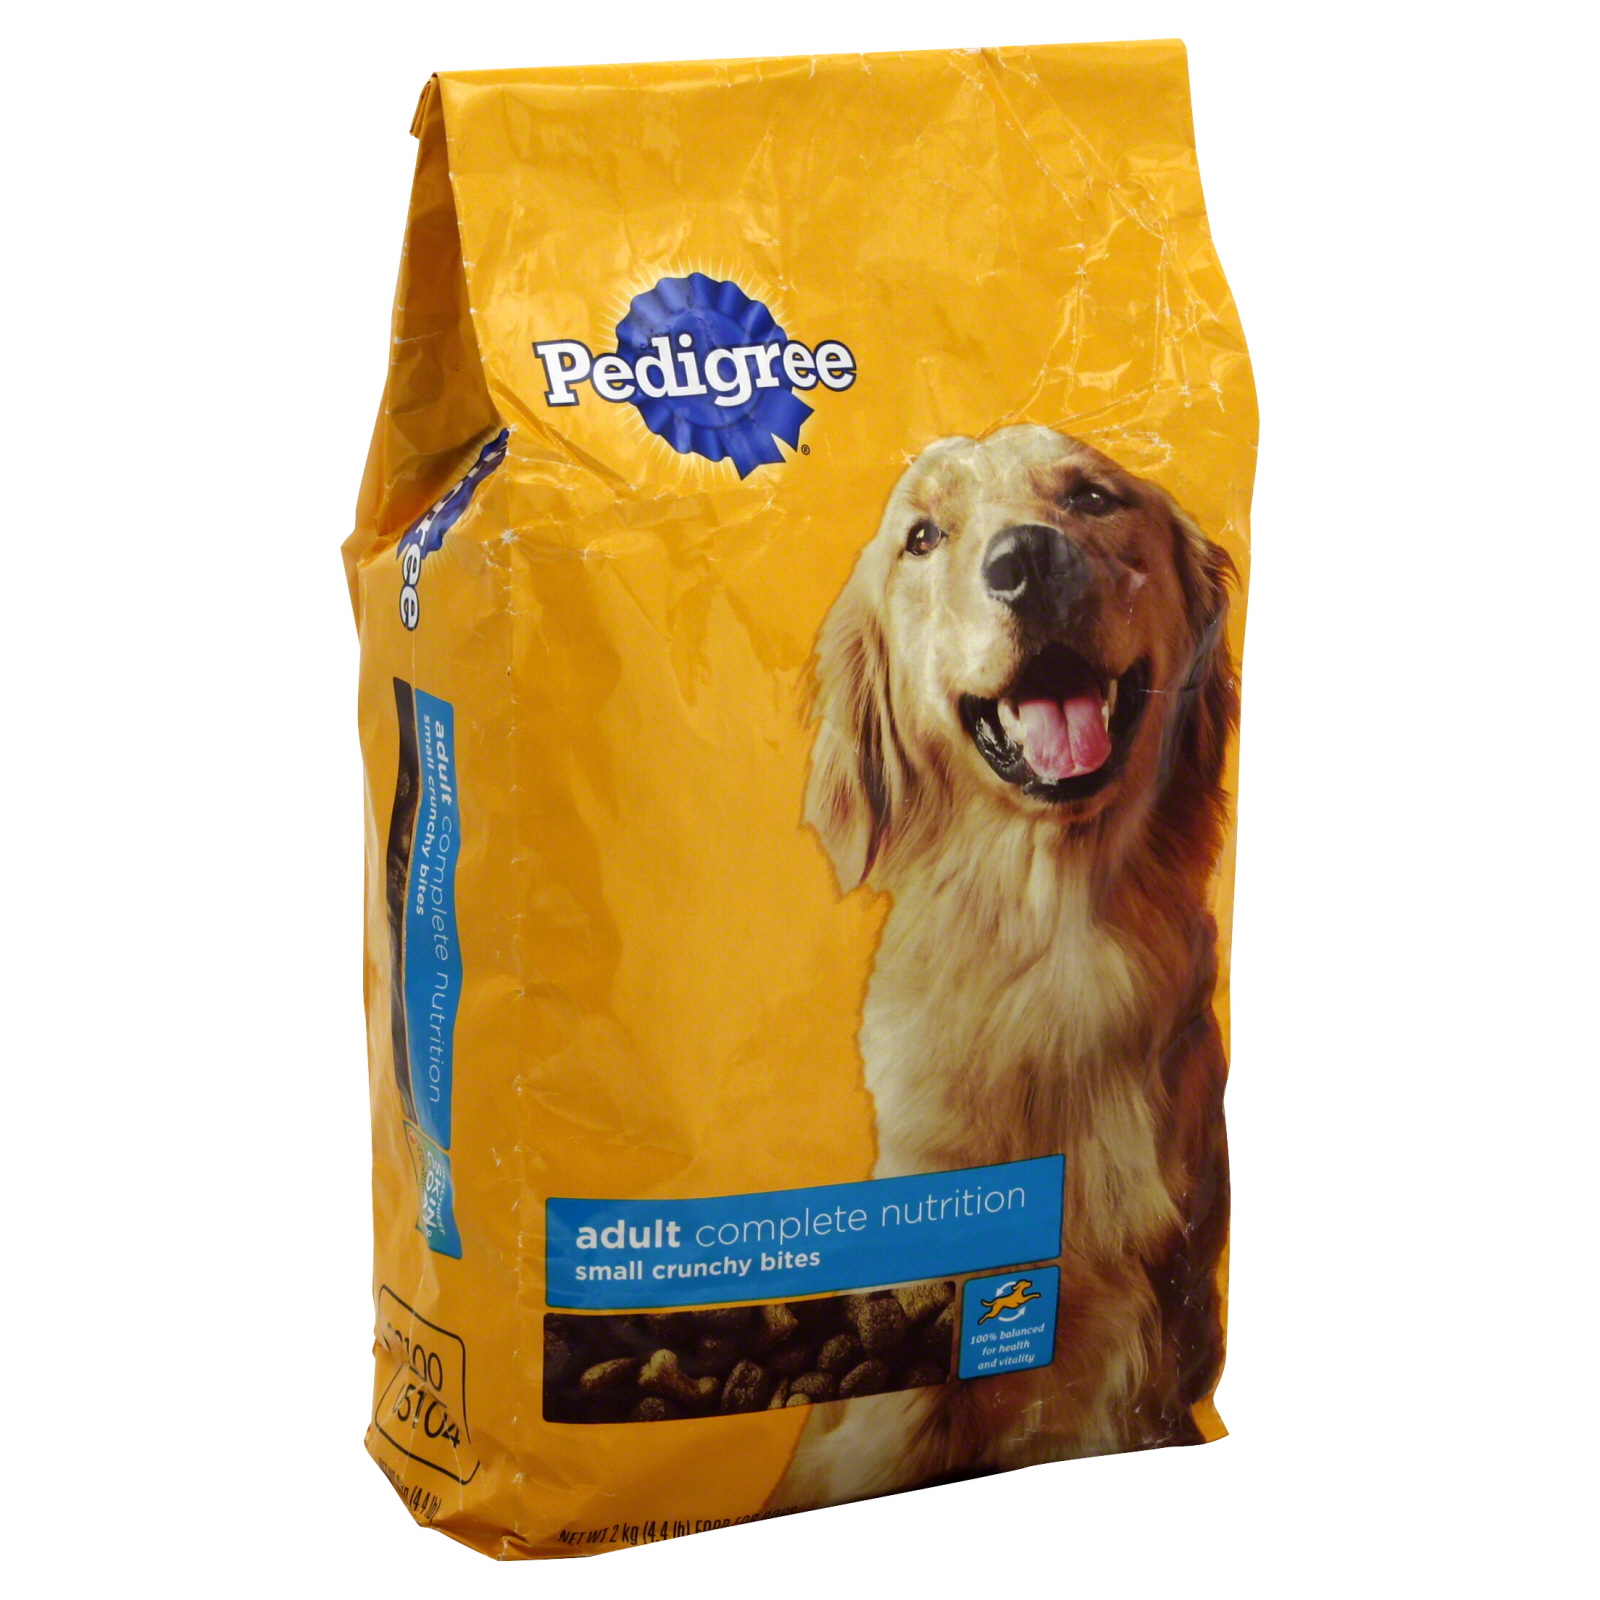 Pedigree Complete Nutrition Food For Dogs, Adult, Small Crunchy Bites, 4.4 lbs (2 kg)